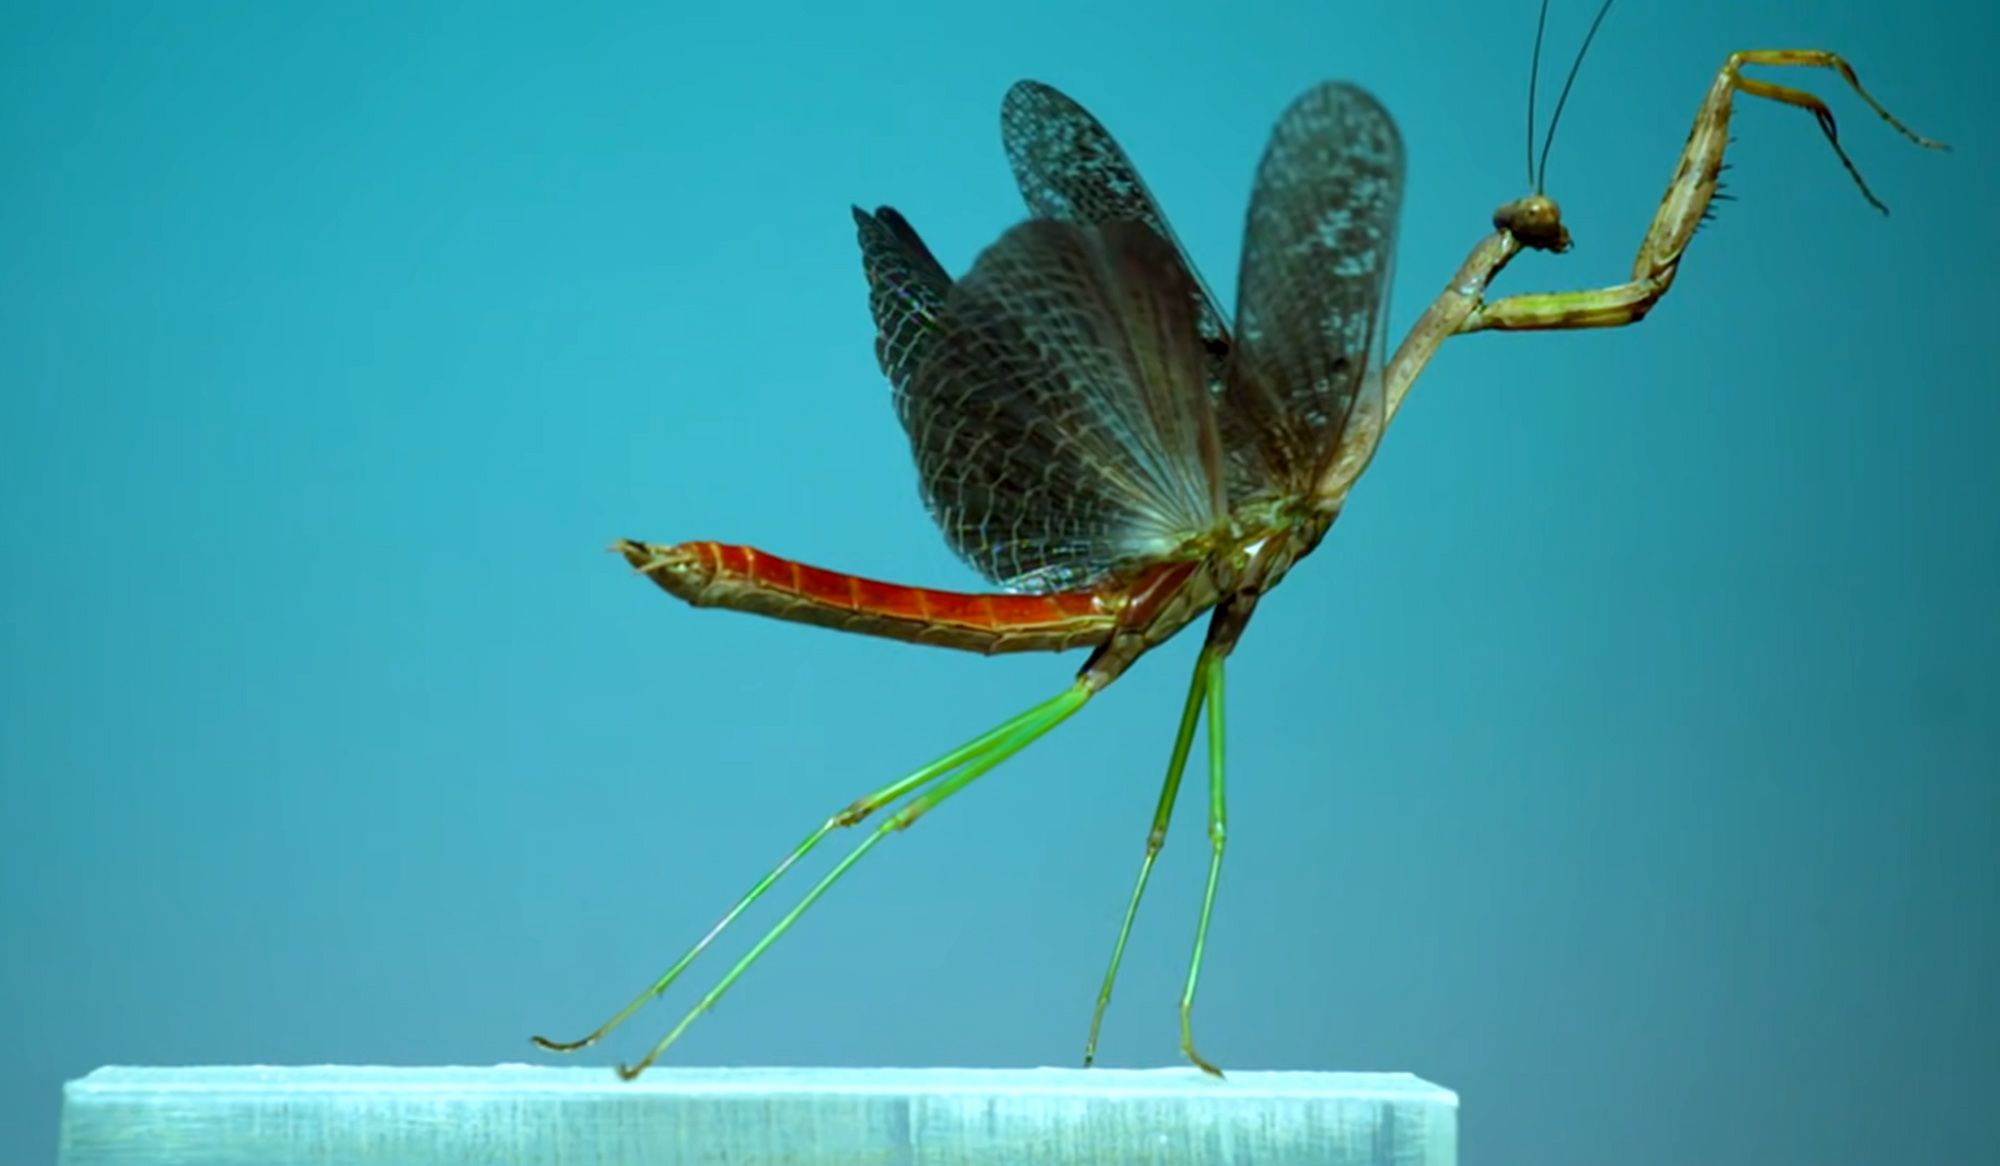 Insects take flight | Aeon Videos